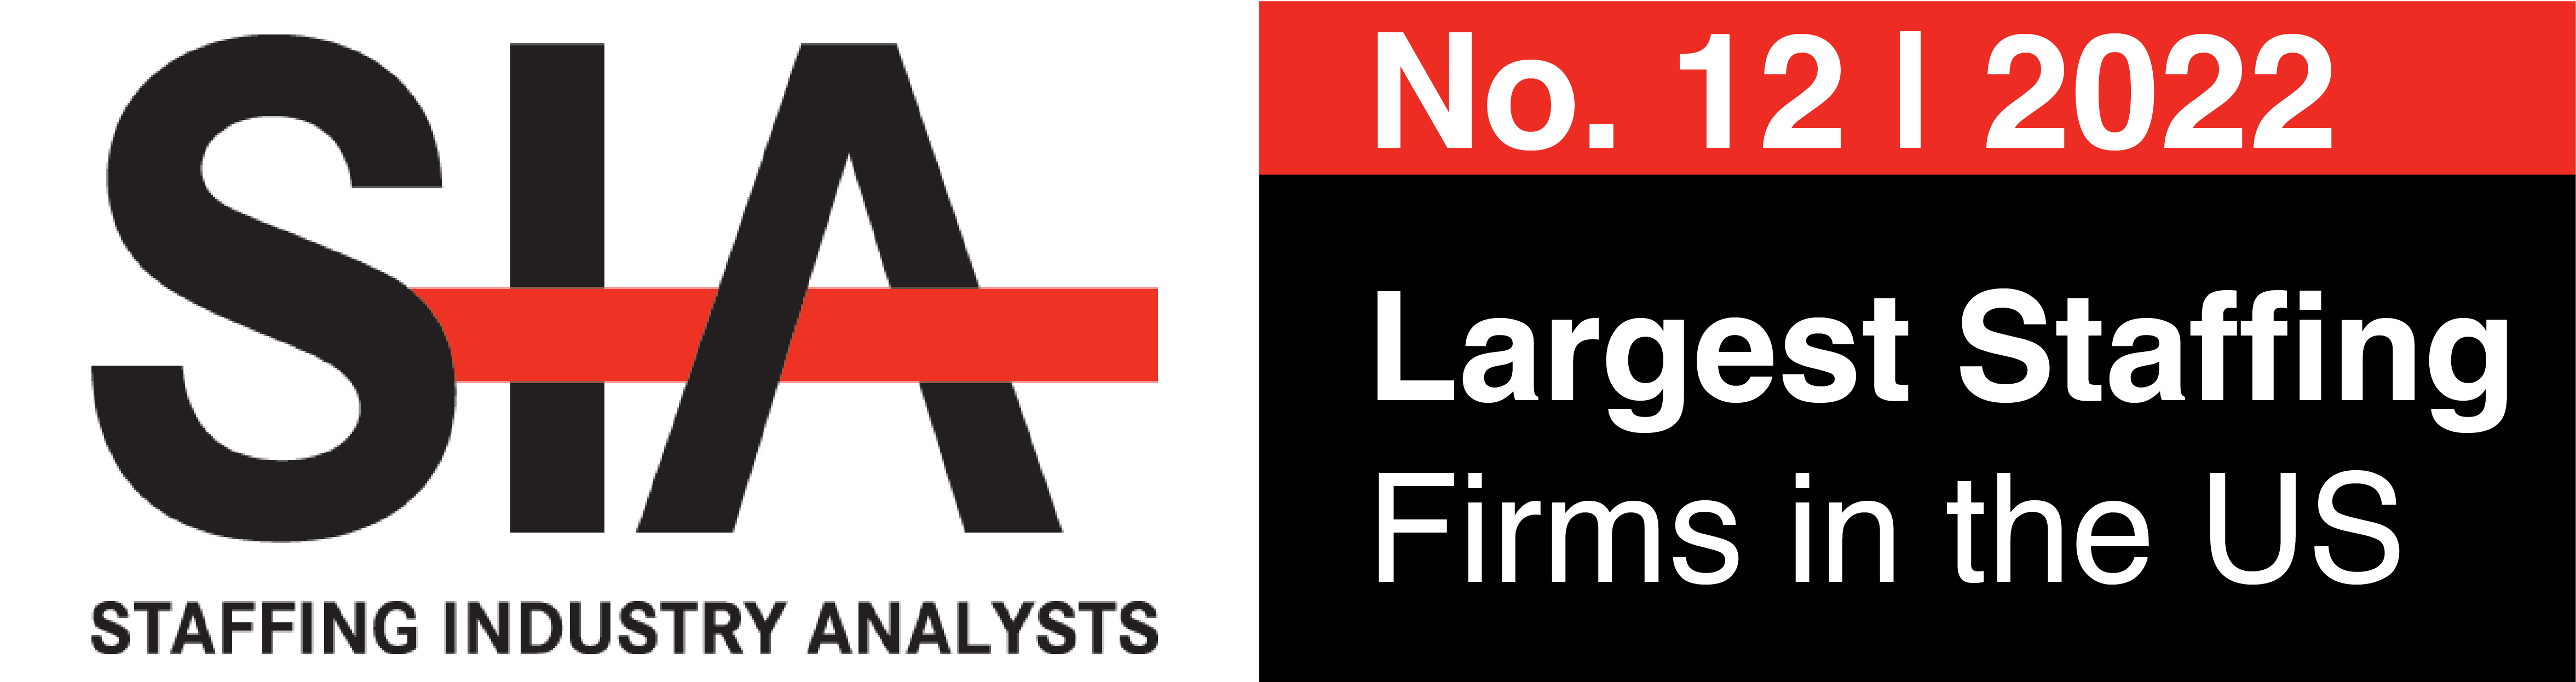 Partners Personnel Announced as 12th Largest Industrial Staffing Firm in the US